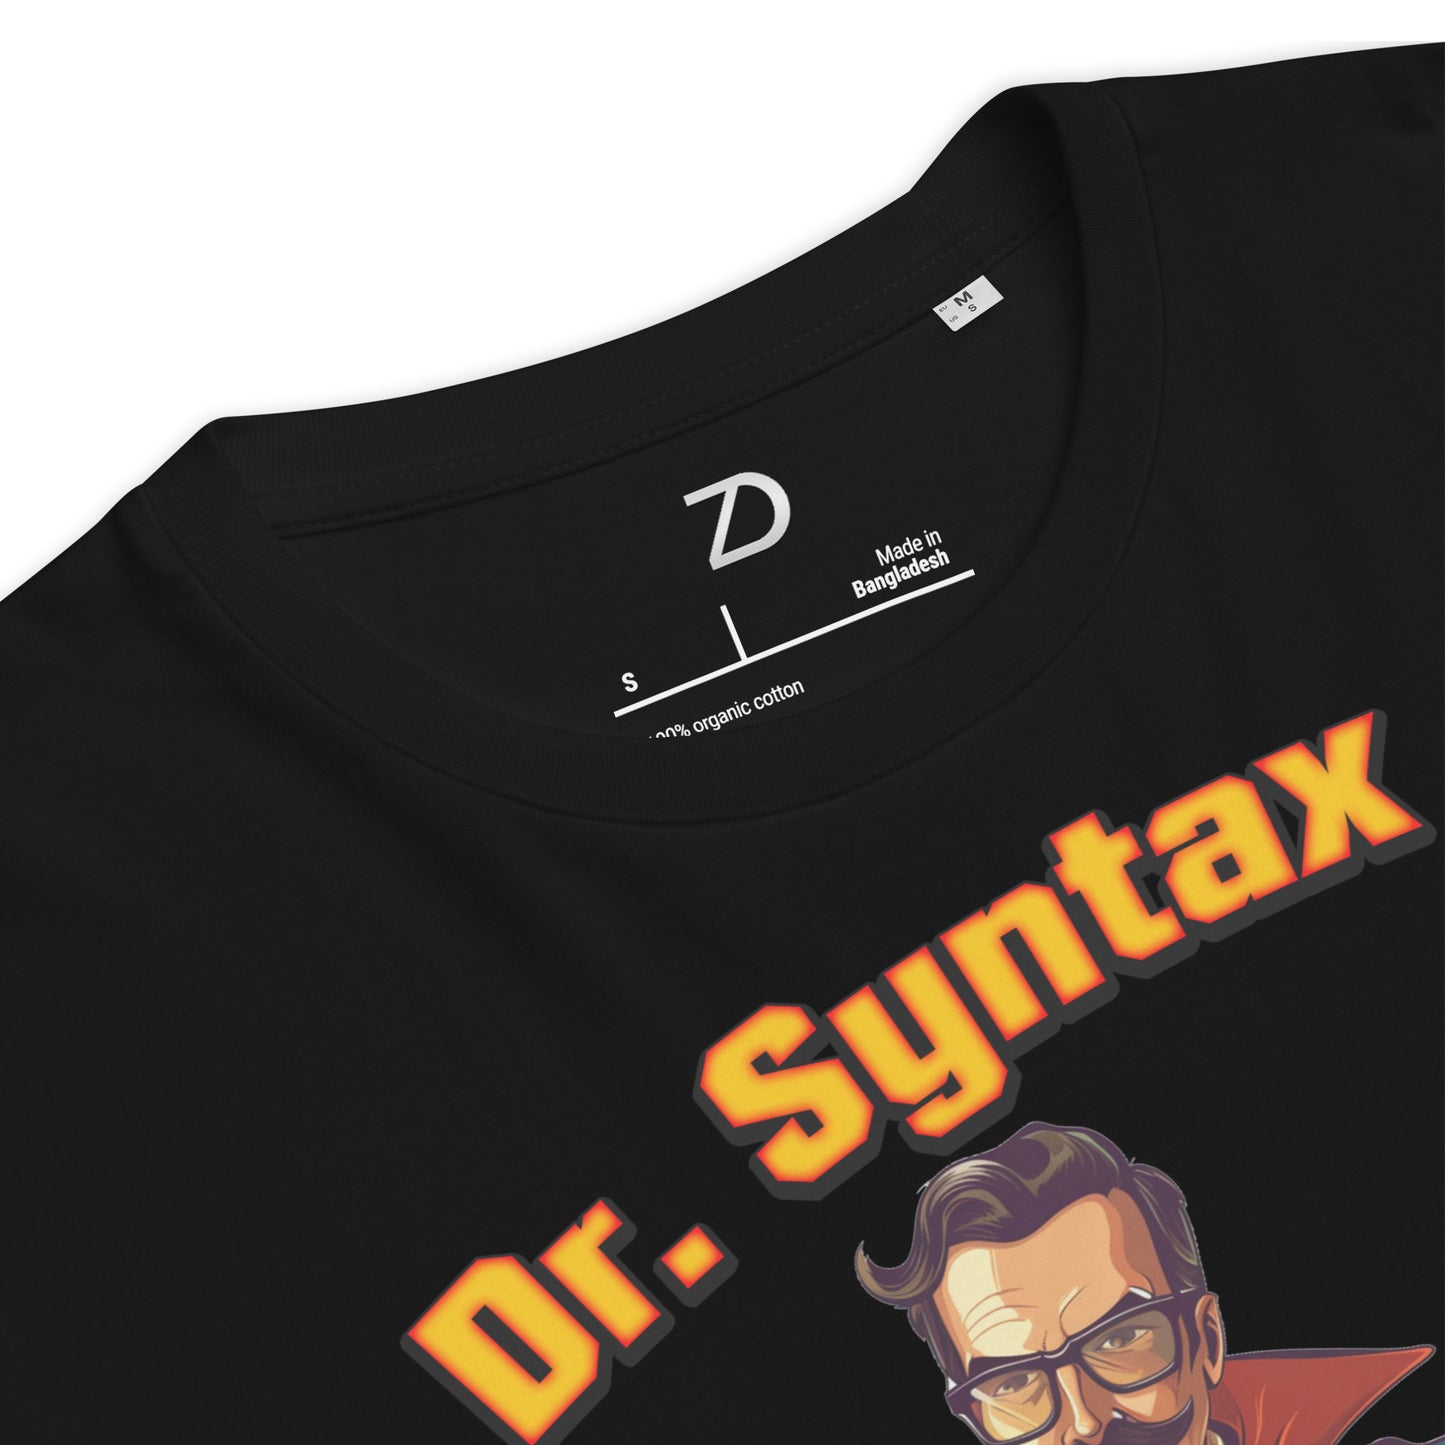 Neduz 'Use Commas' Organic Cotton Tee - Dr. Syntax Collection for Grammar Enthusiasts